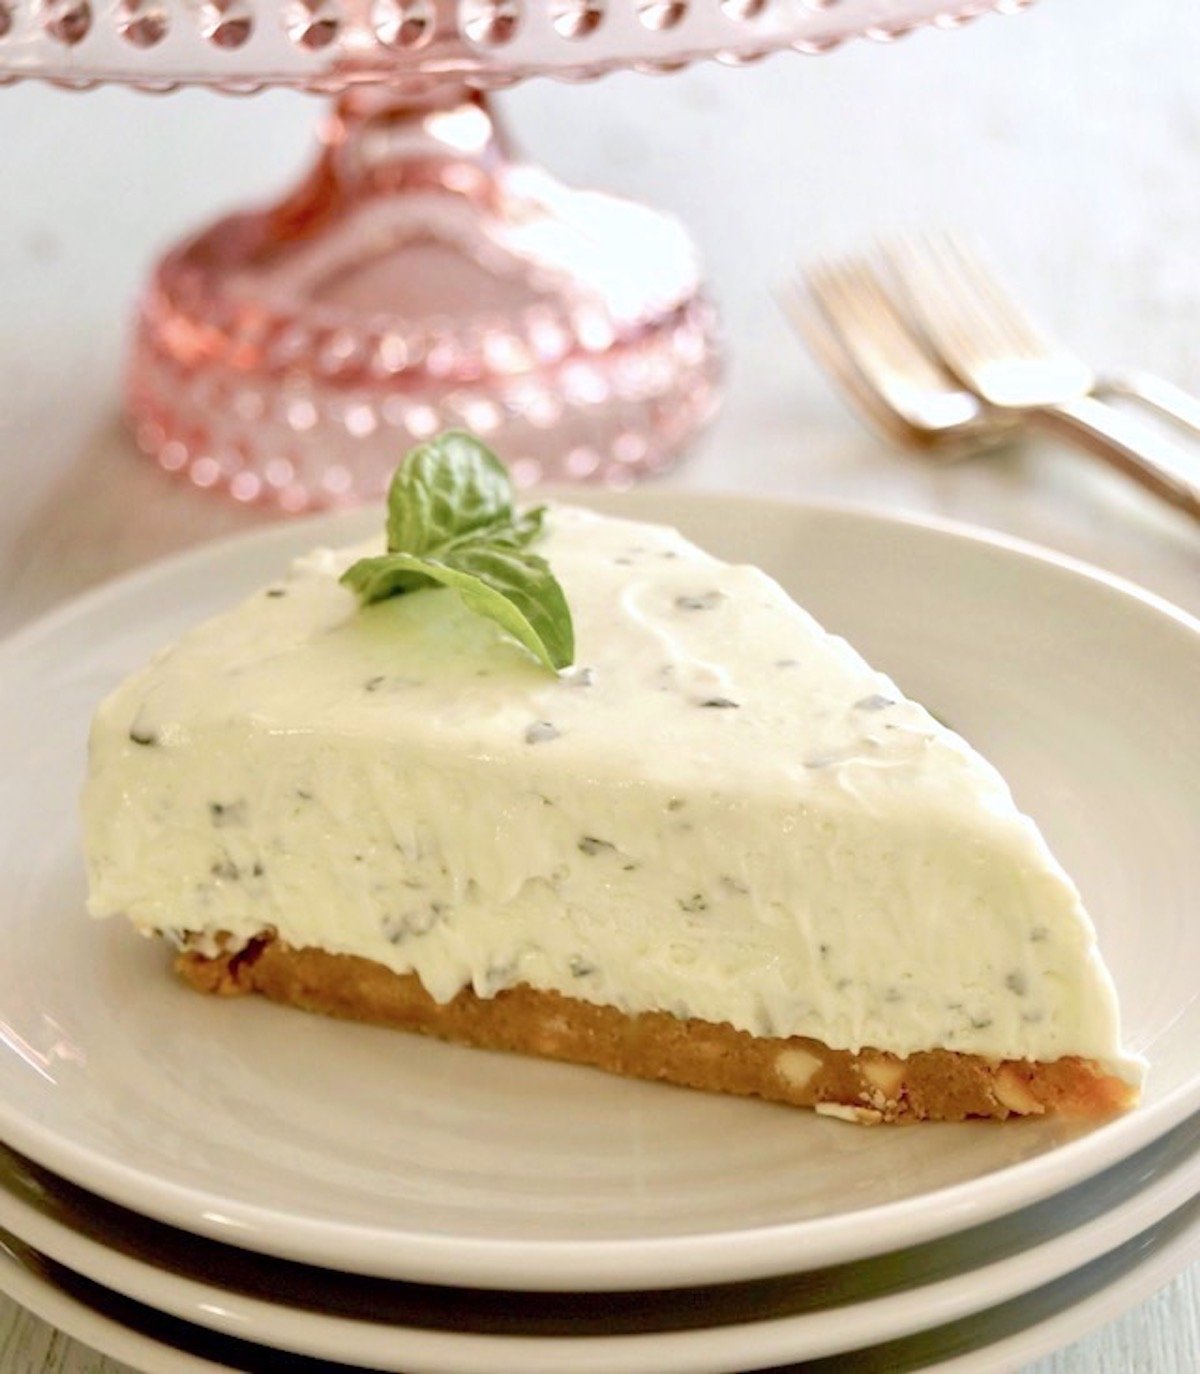 One slice of a basil cheesecake with a small basil sprig on top, on a white plate.